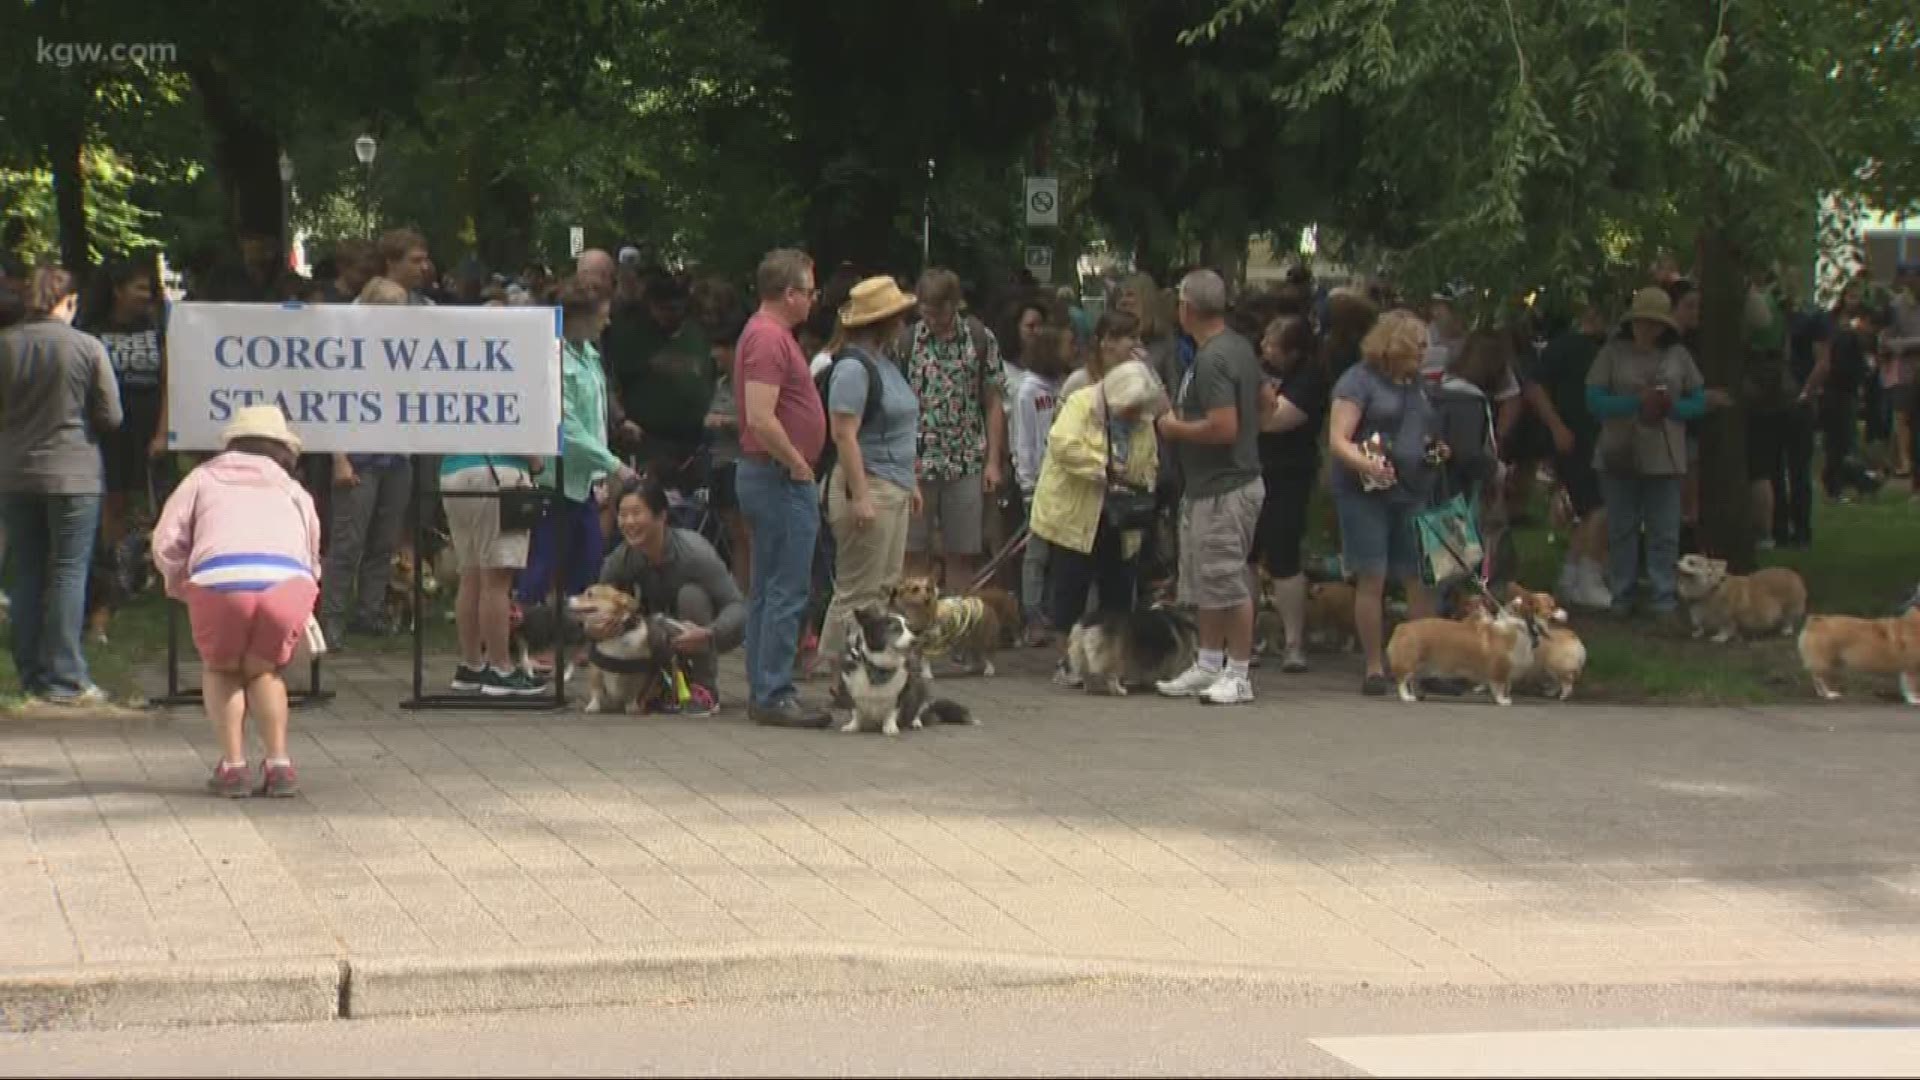 As dueling protests took place in Portland, others enjoyed fun community events.